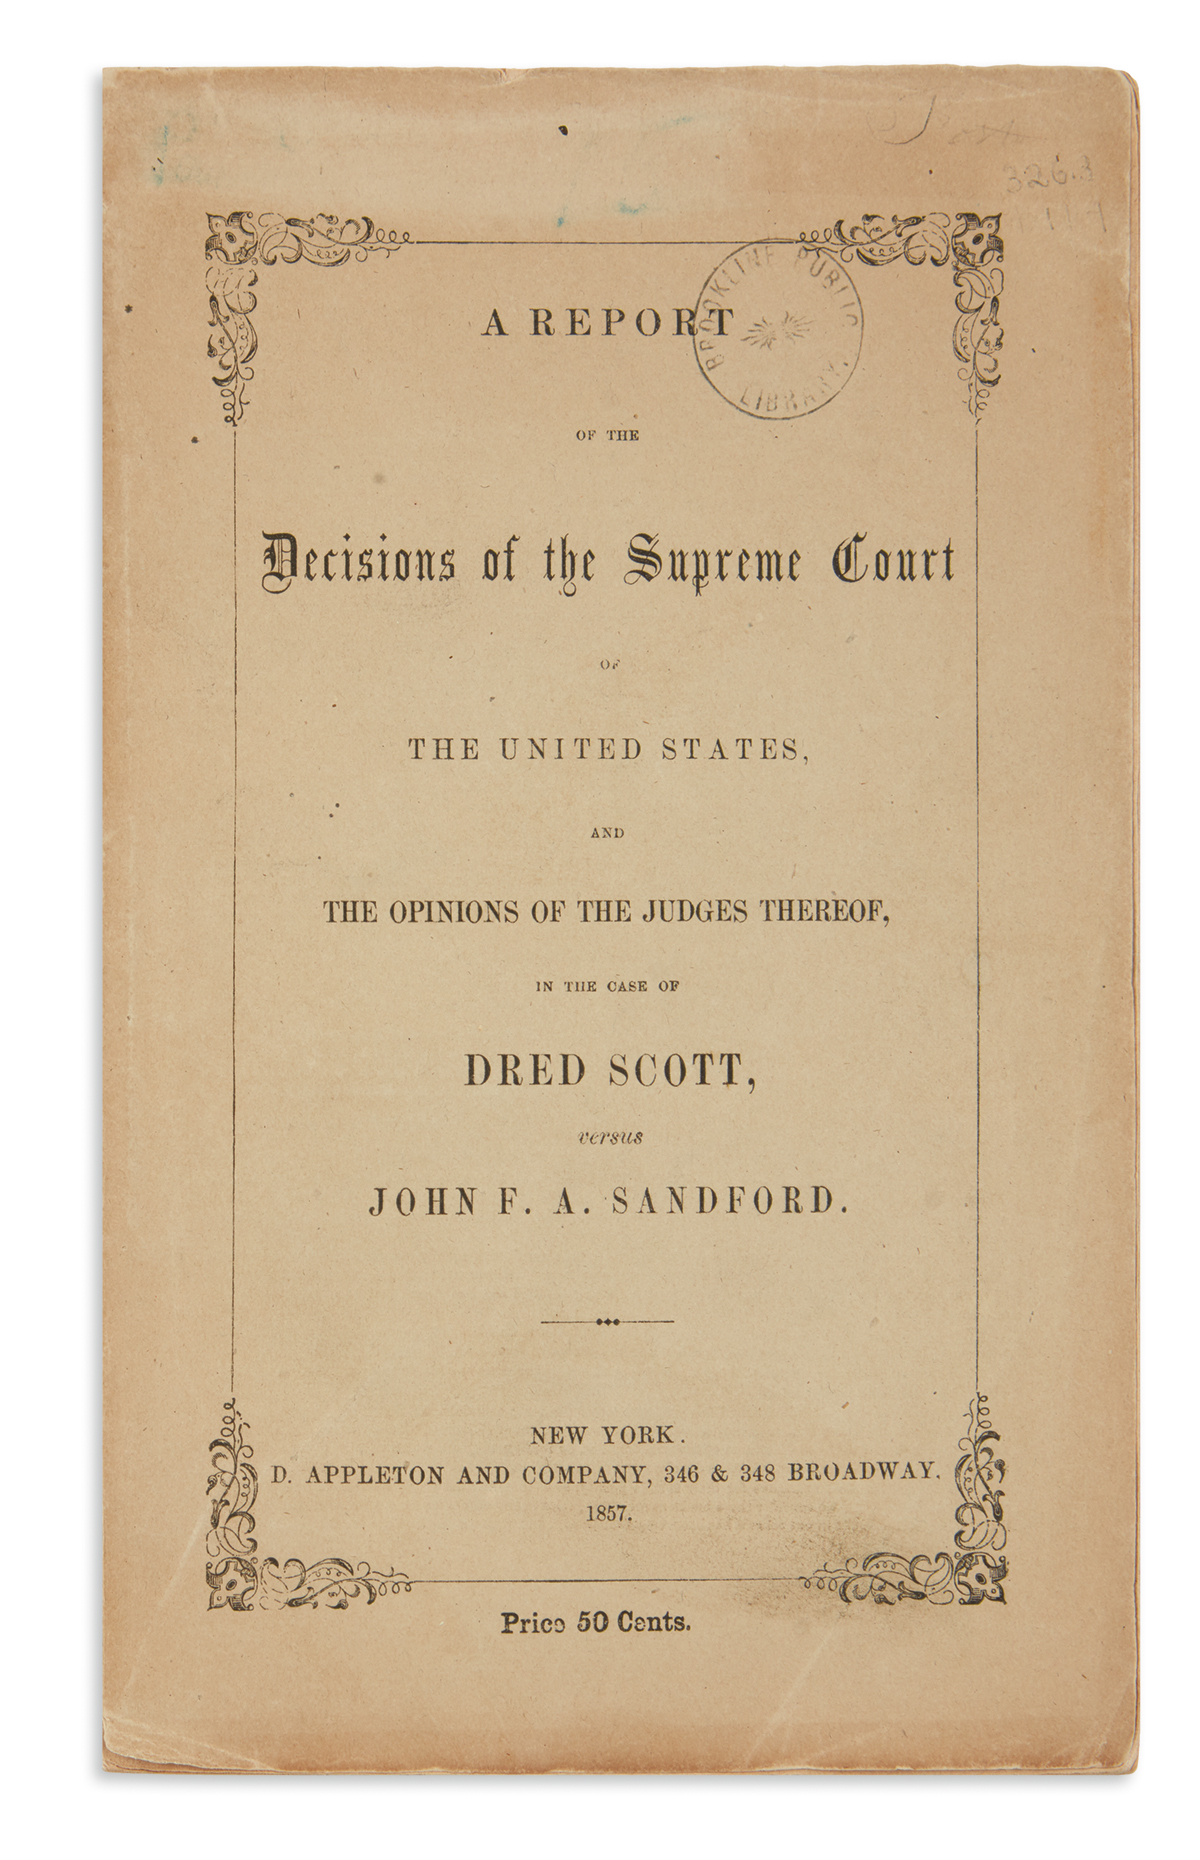 (SLAVERY AND ABOLITION.) Howard, Benjamin C. A Report of the Decision of the Supreme Court . . . in the Case of Dred Scott